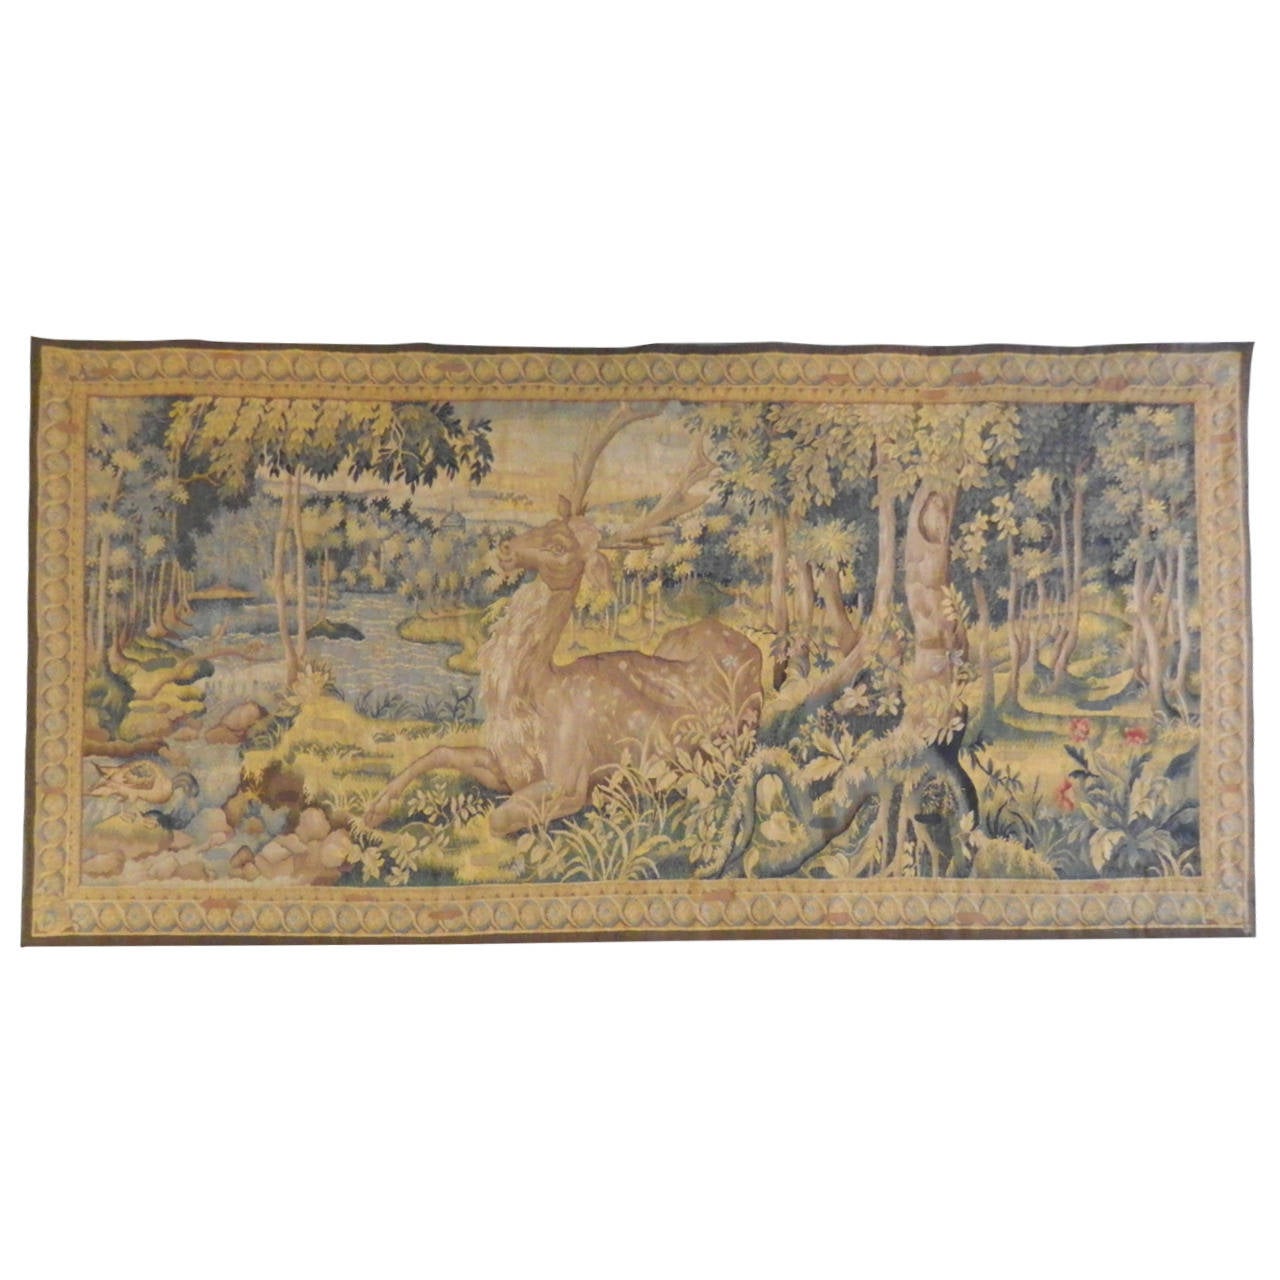 Large antique Aubusson tapestry with a stag in the woods near a stream backed in taupe cotton with soft blues and taupe colors. It is 105" wide by 56.5" high. It has been professionally repaired.
France, circa 19th century.